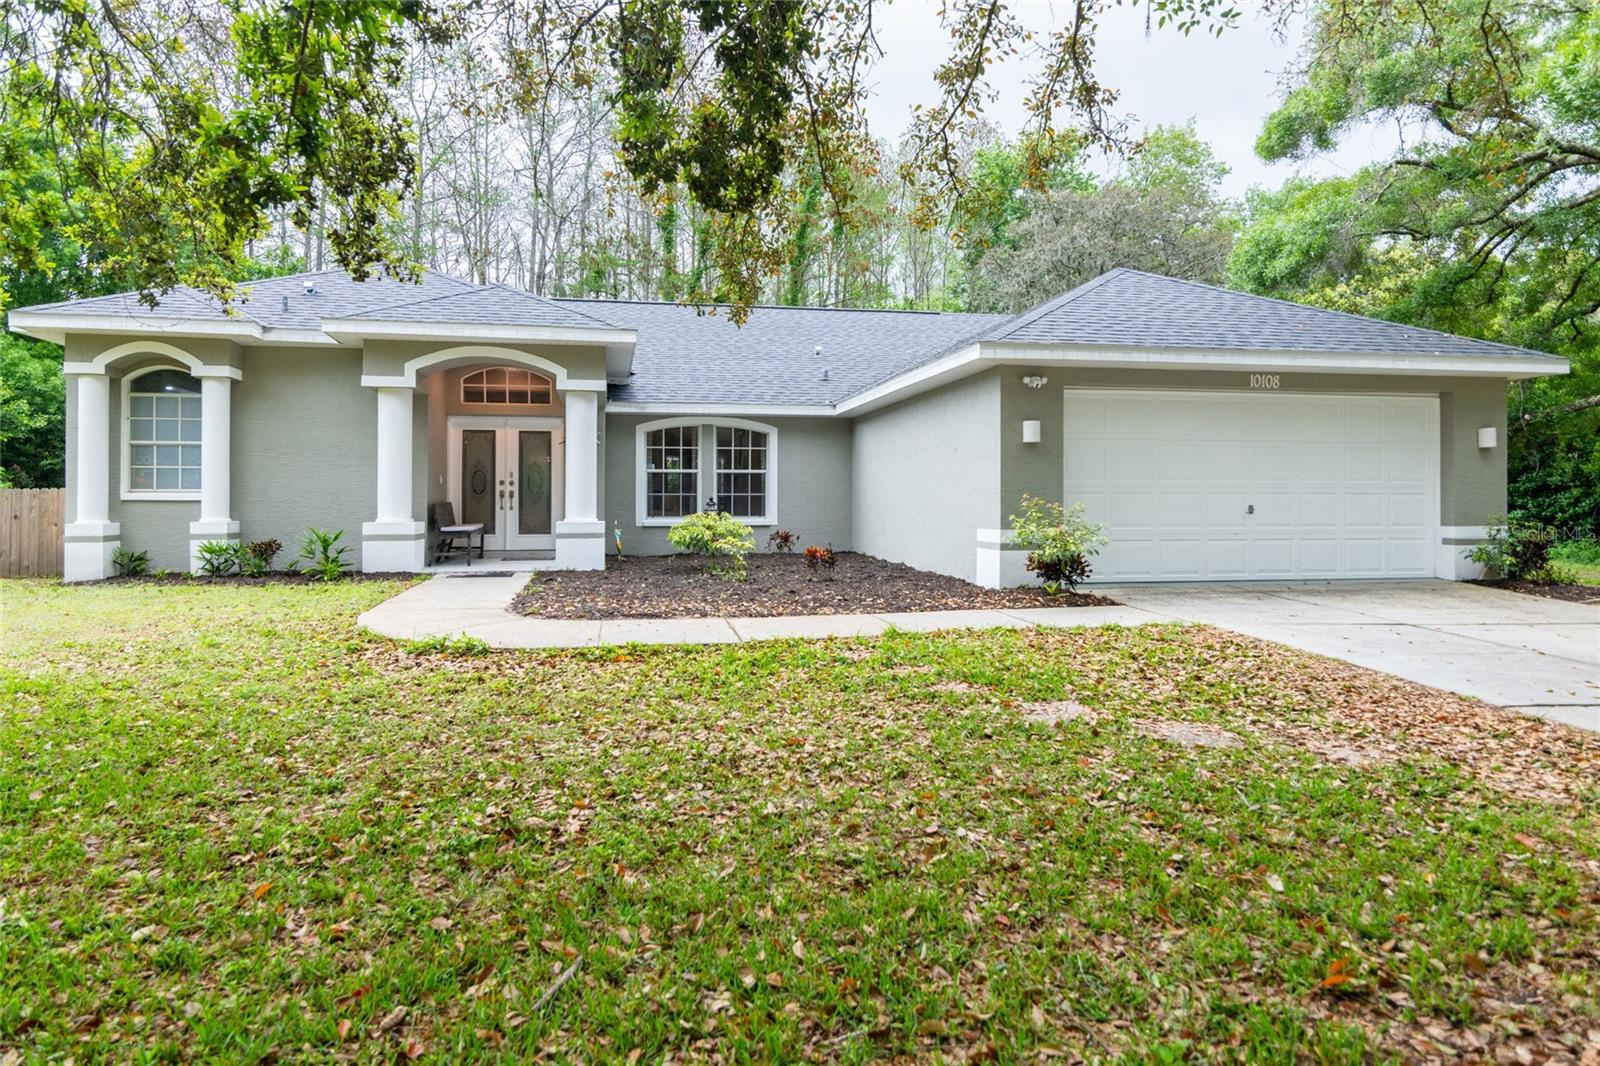 MUST SEE 4 BEDROOM 2 BATH POOL HOME on 1.56 ACRES that was completely REMODELED in 2022. NO HOA OR CDD and located on a CUL-DE-SAC.